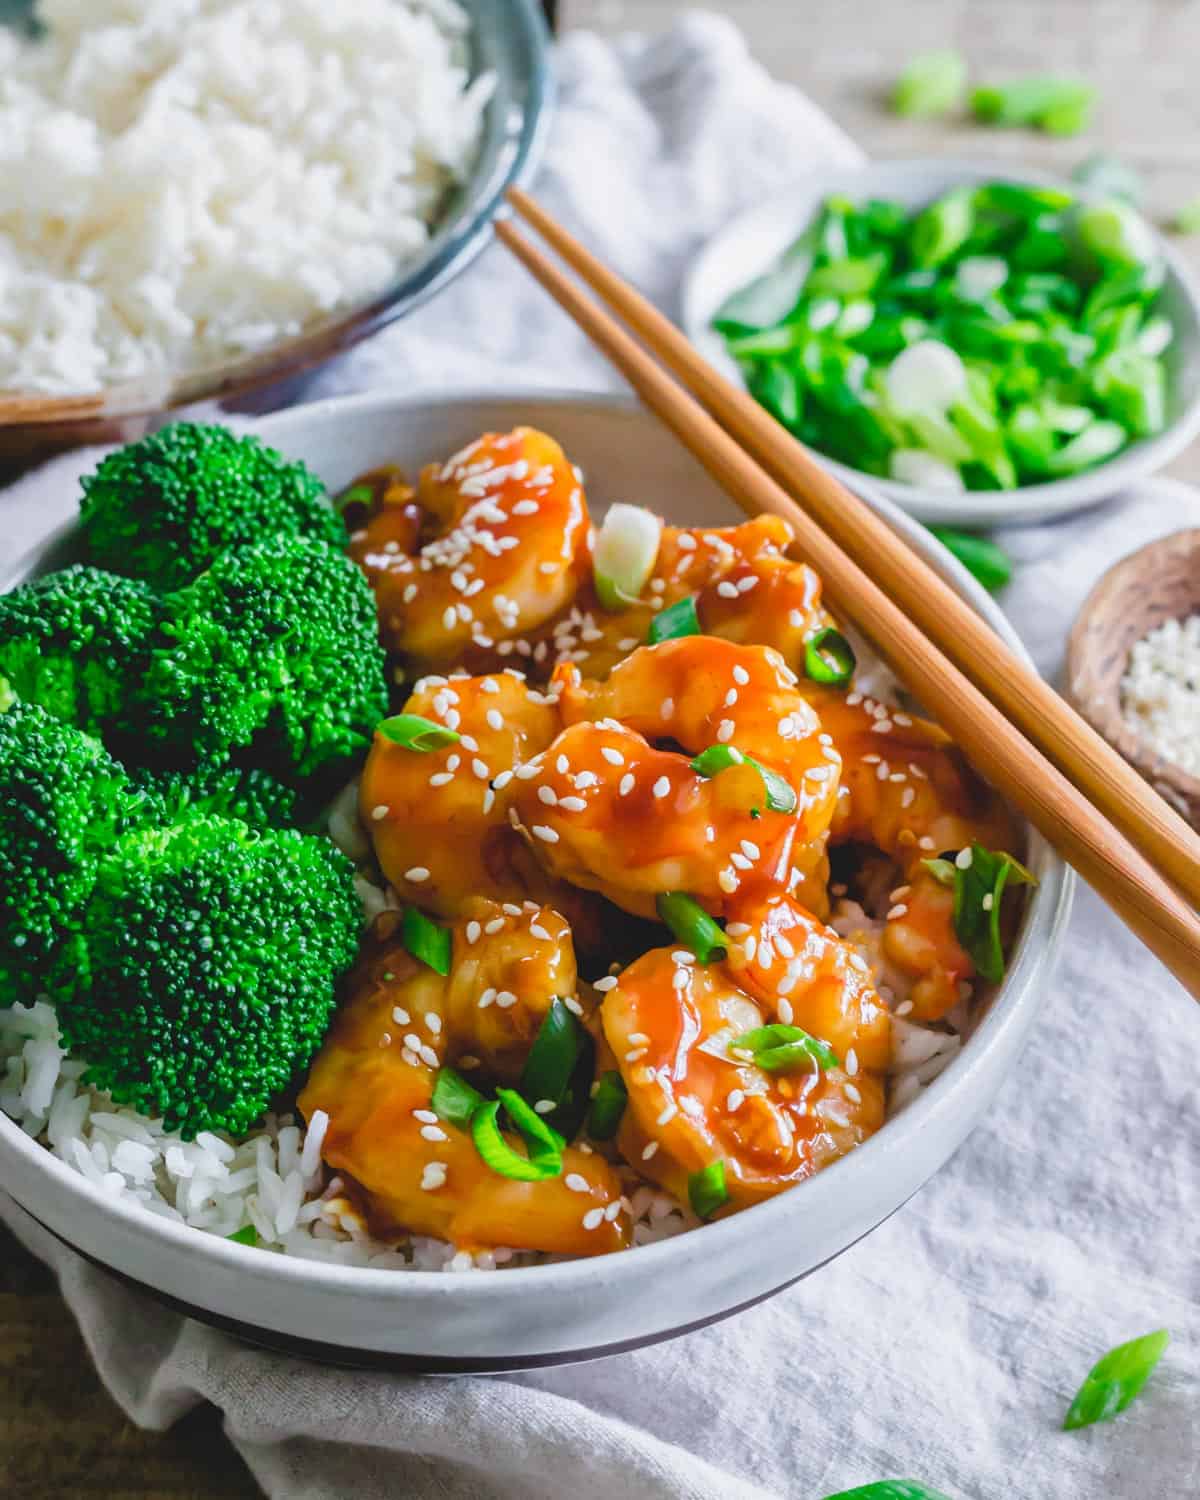 General Tso shrimp in a bowl with broccoli, white rice and chopsticks on the side.